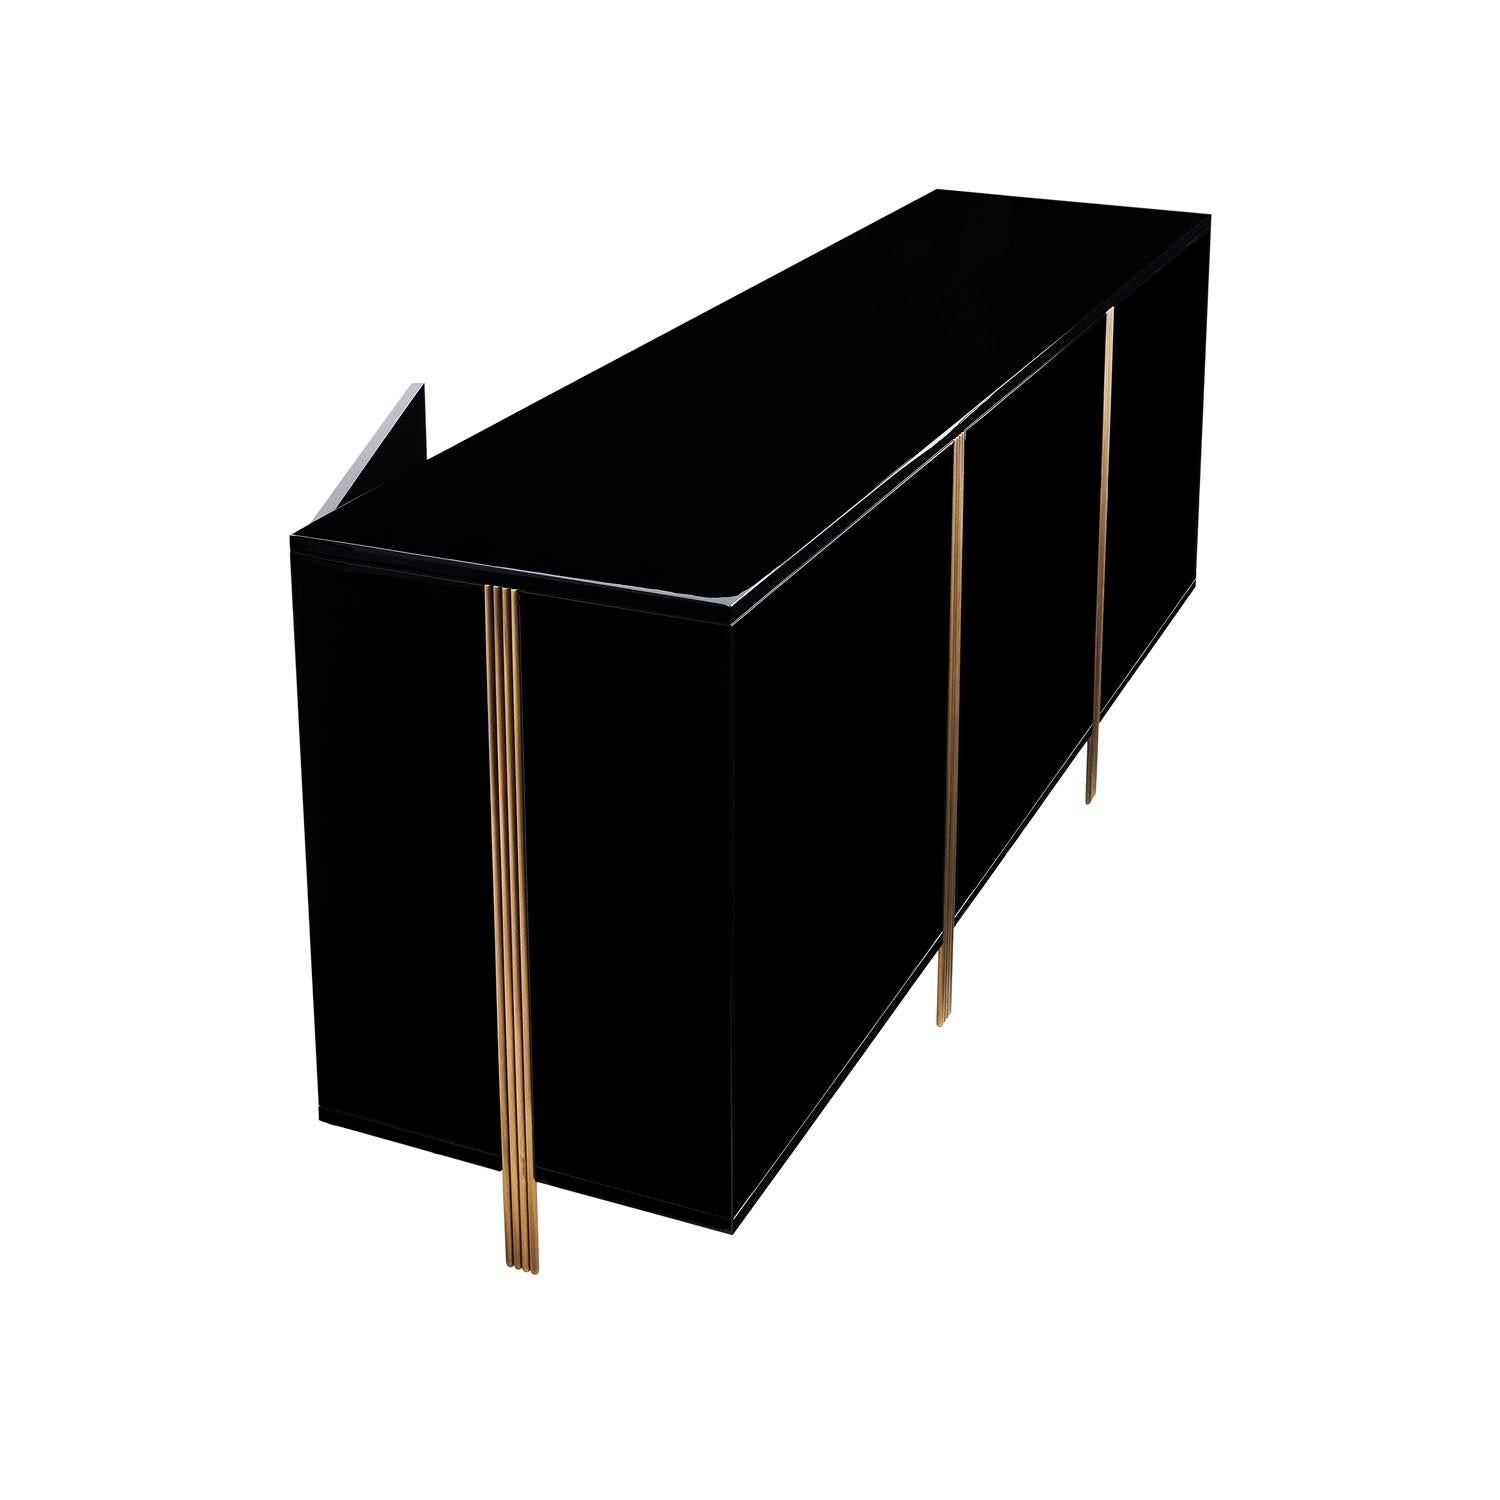 VERSAGA sideboard, a piece of retro design, sober and balanced to meet any need of the dining room.‎ Made of lacquered wood with antique brass feet and handles, the final touch is given by the interior completely covered in elegant suede.‎ Versaga